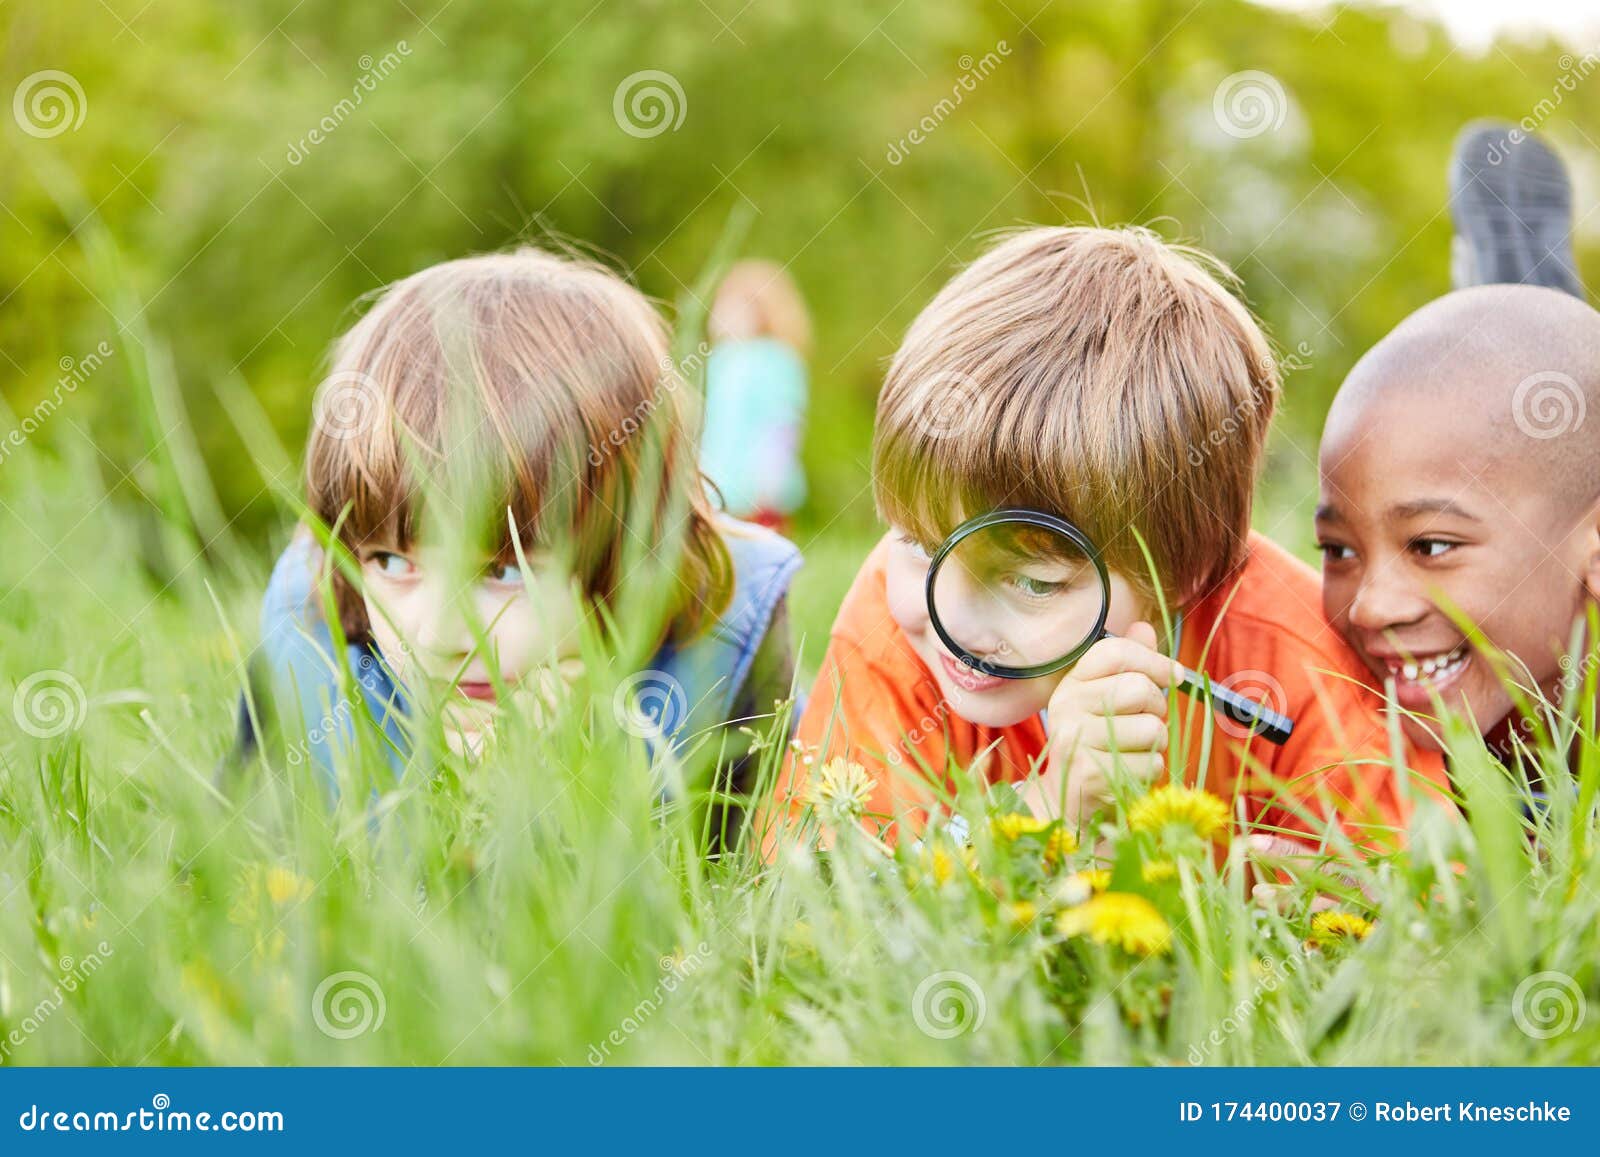 Sind tabe lejesoldat Three Kids are Exploring Nature with the Magnifying Glass Stock Image -  Image of environmentalism, biology: 174400037